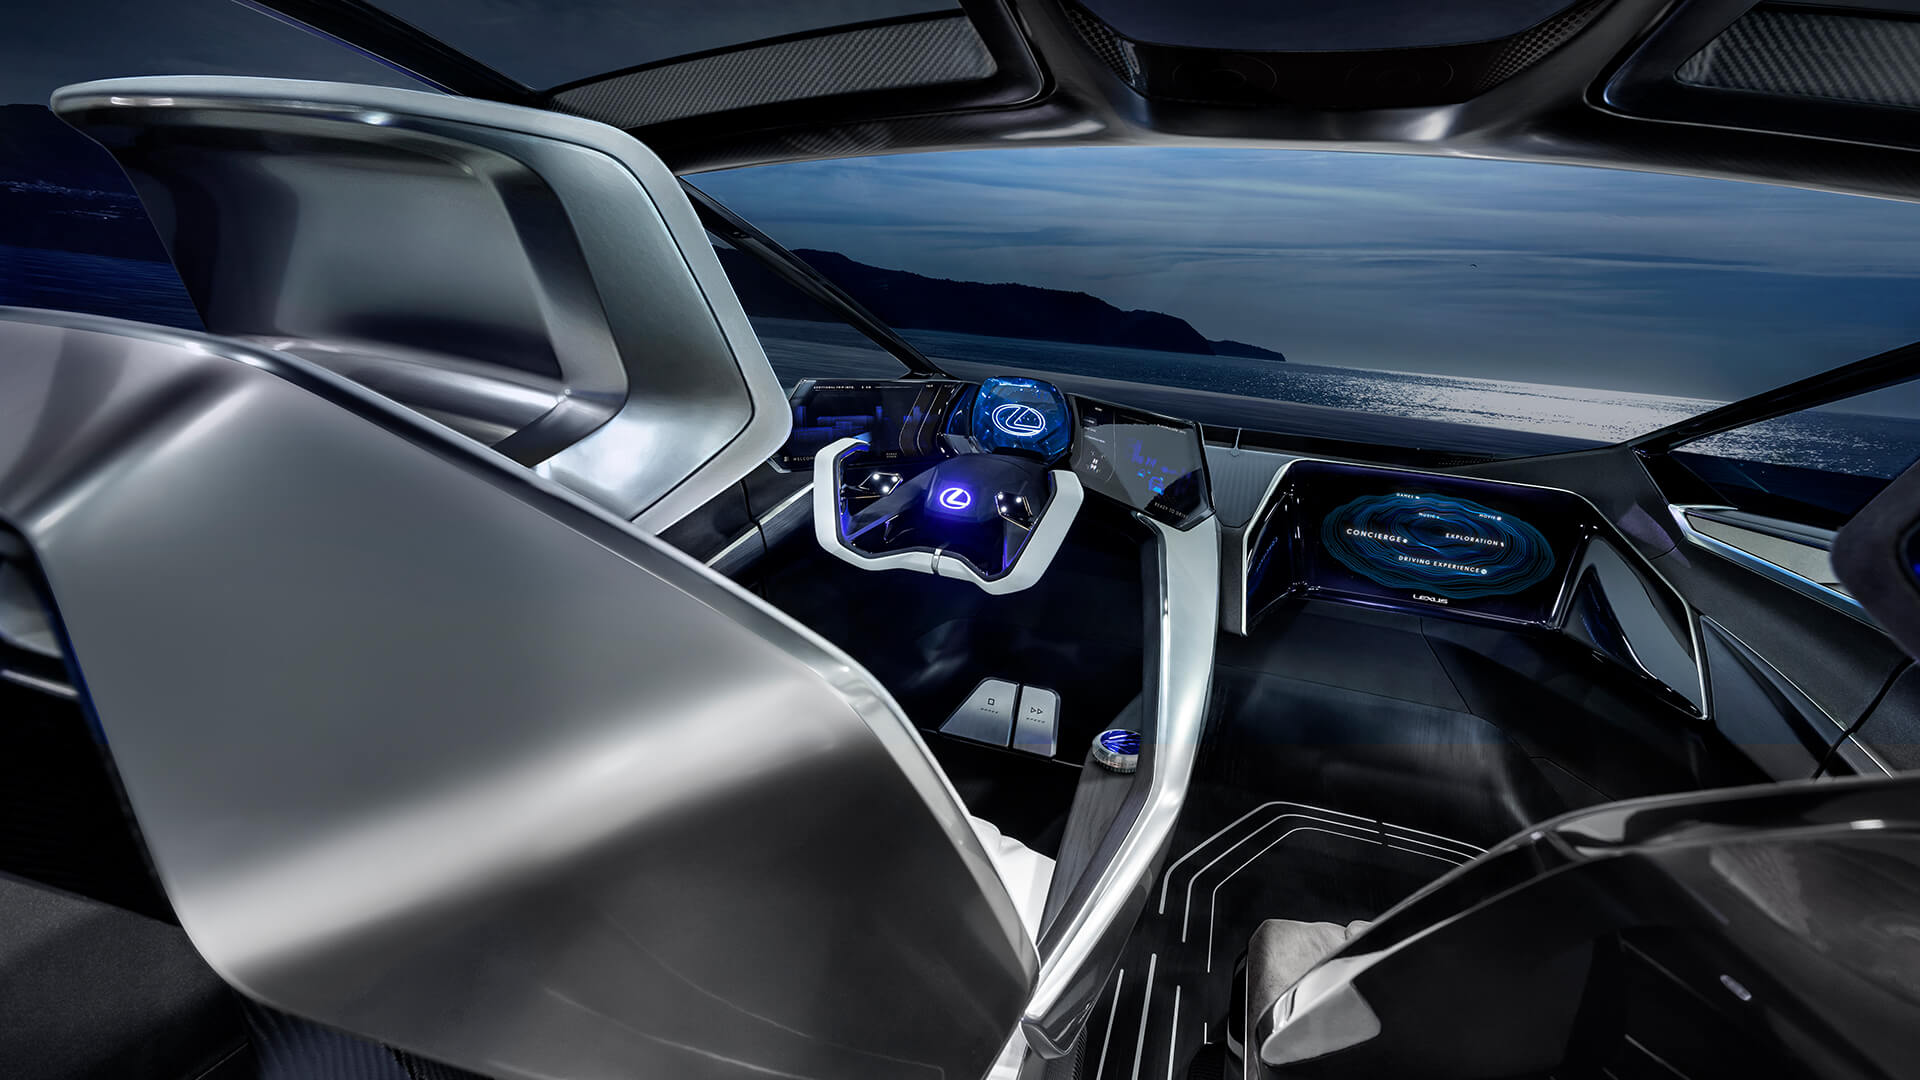 interior shot of the Lexus LF-30 Electrified drivers seat